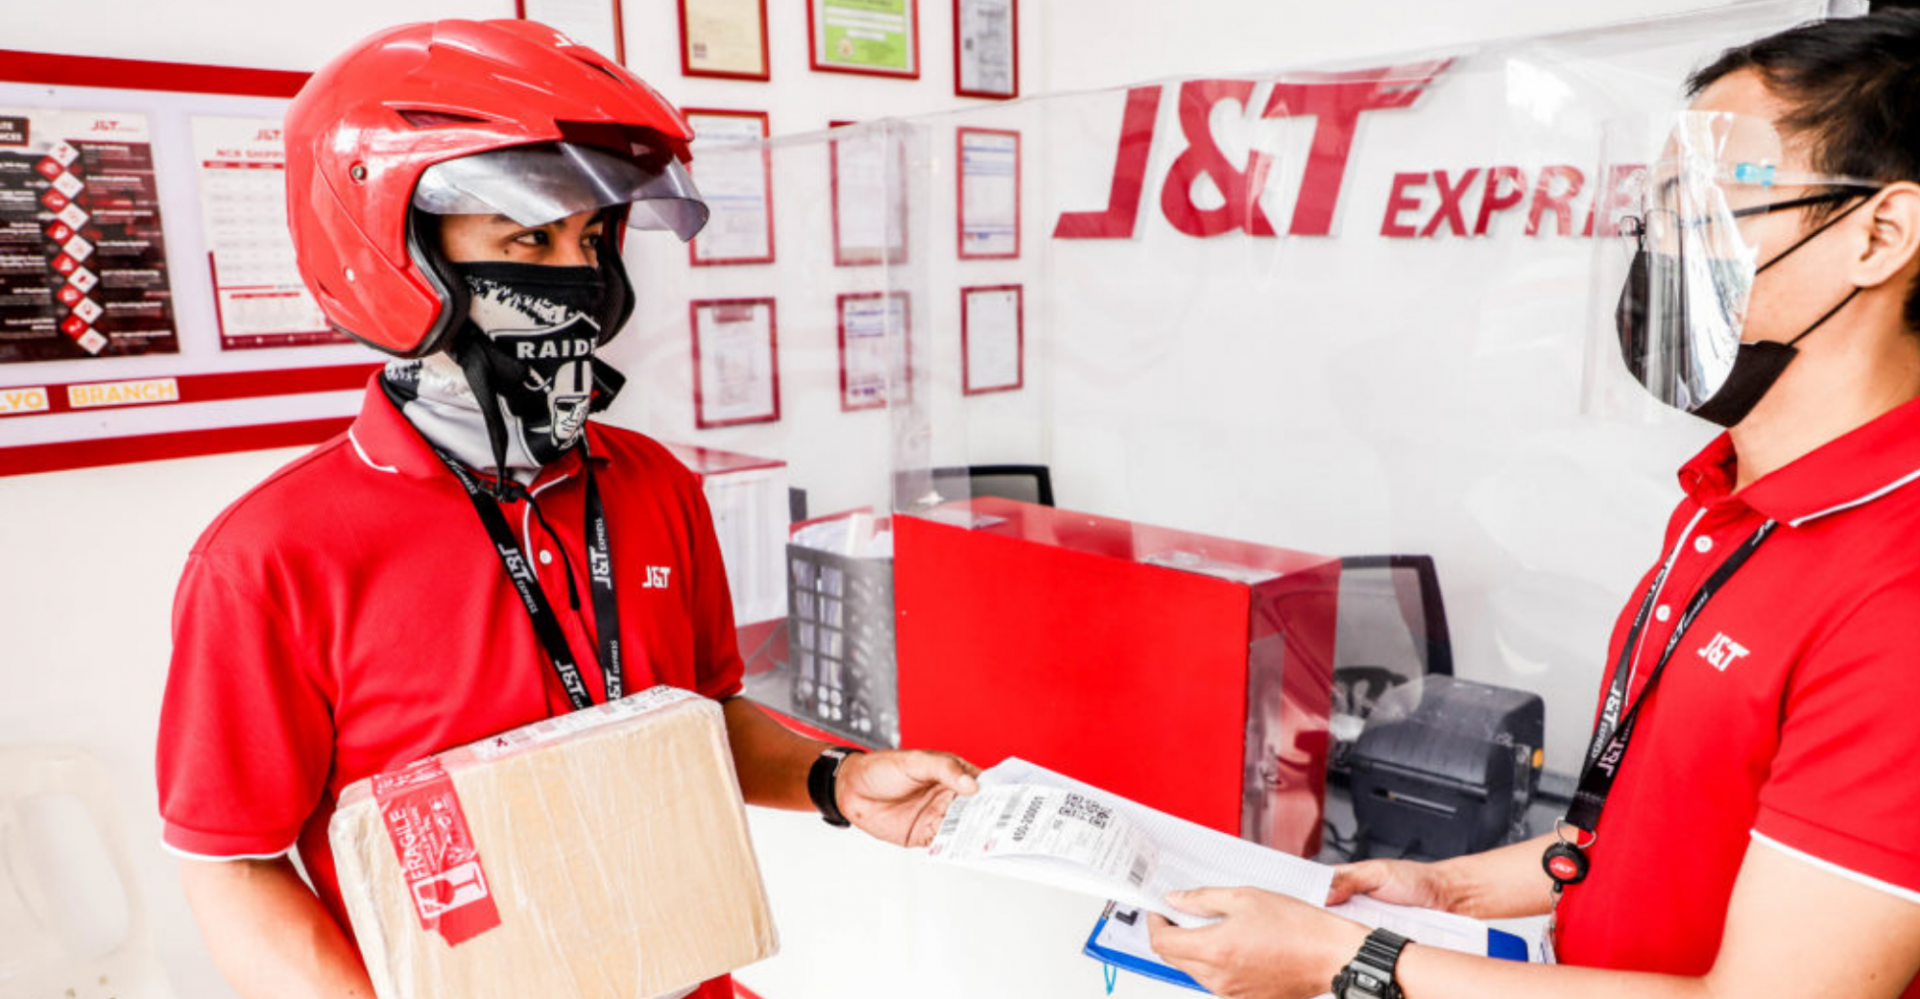 J&T Express secures $2 billion from a group of investors including Temasek